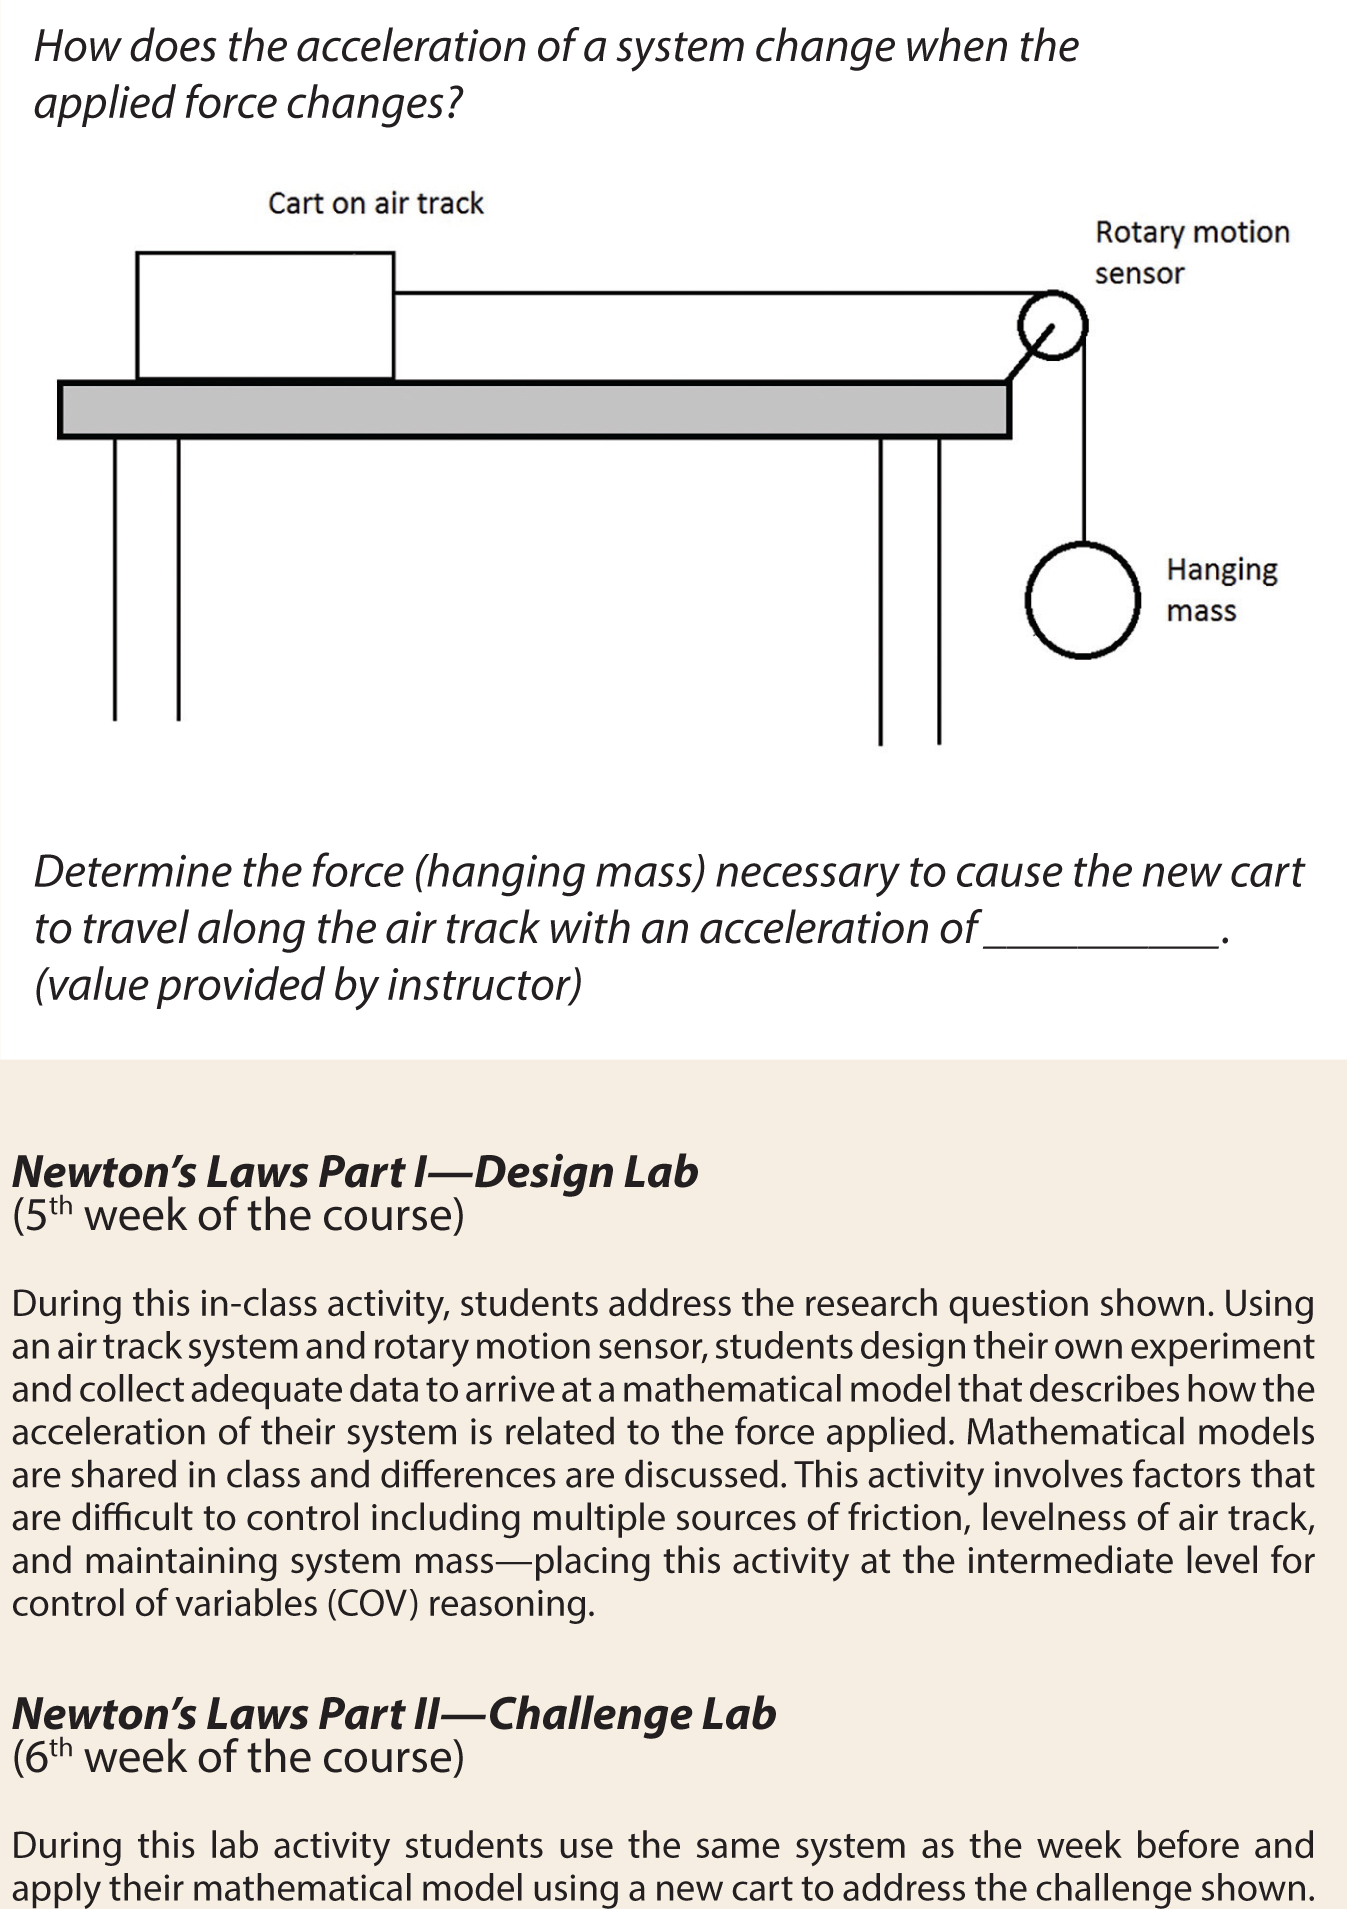 Example of two in-class lab activities. Note that these are not open-ended activities and question prompts are embedded to guide students in the design and evaluation of the experiments.